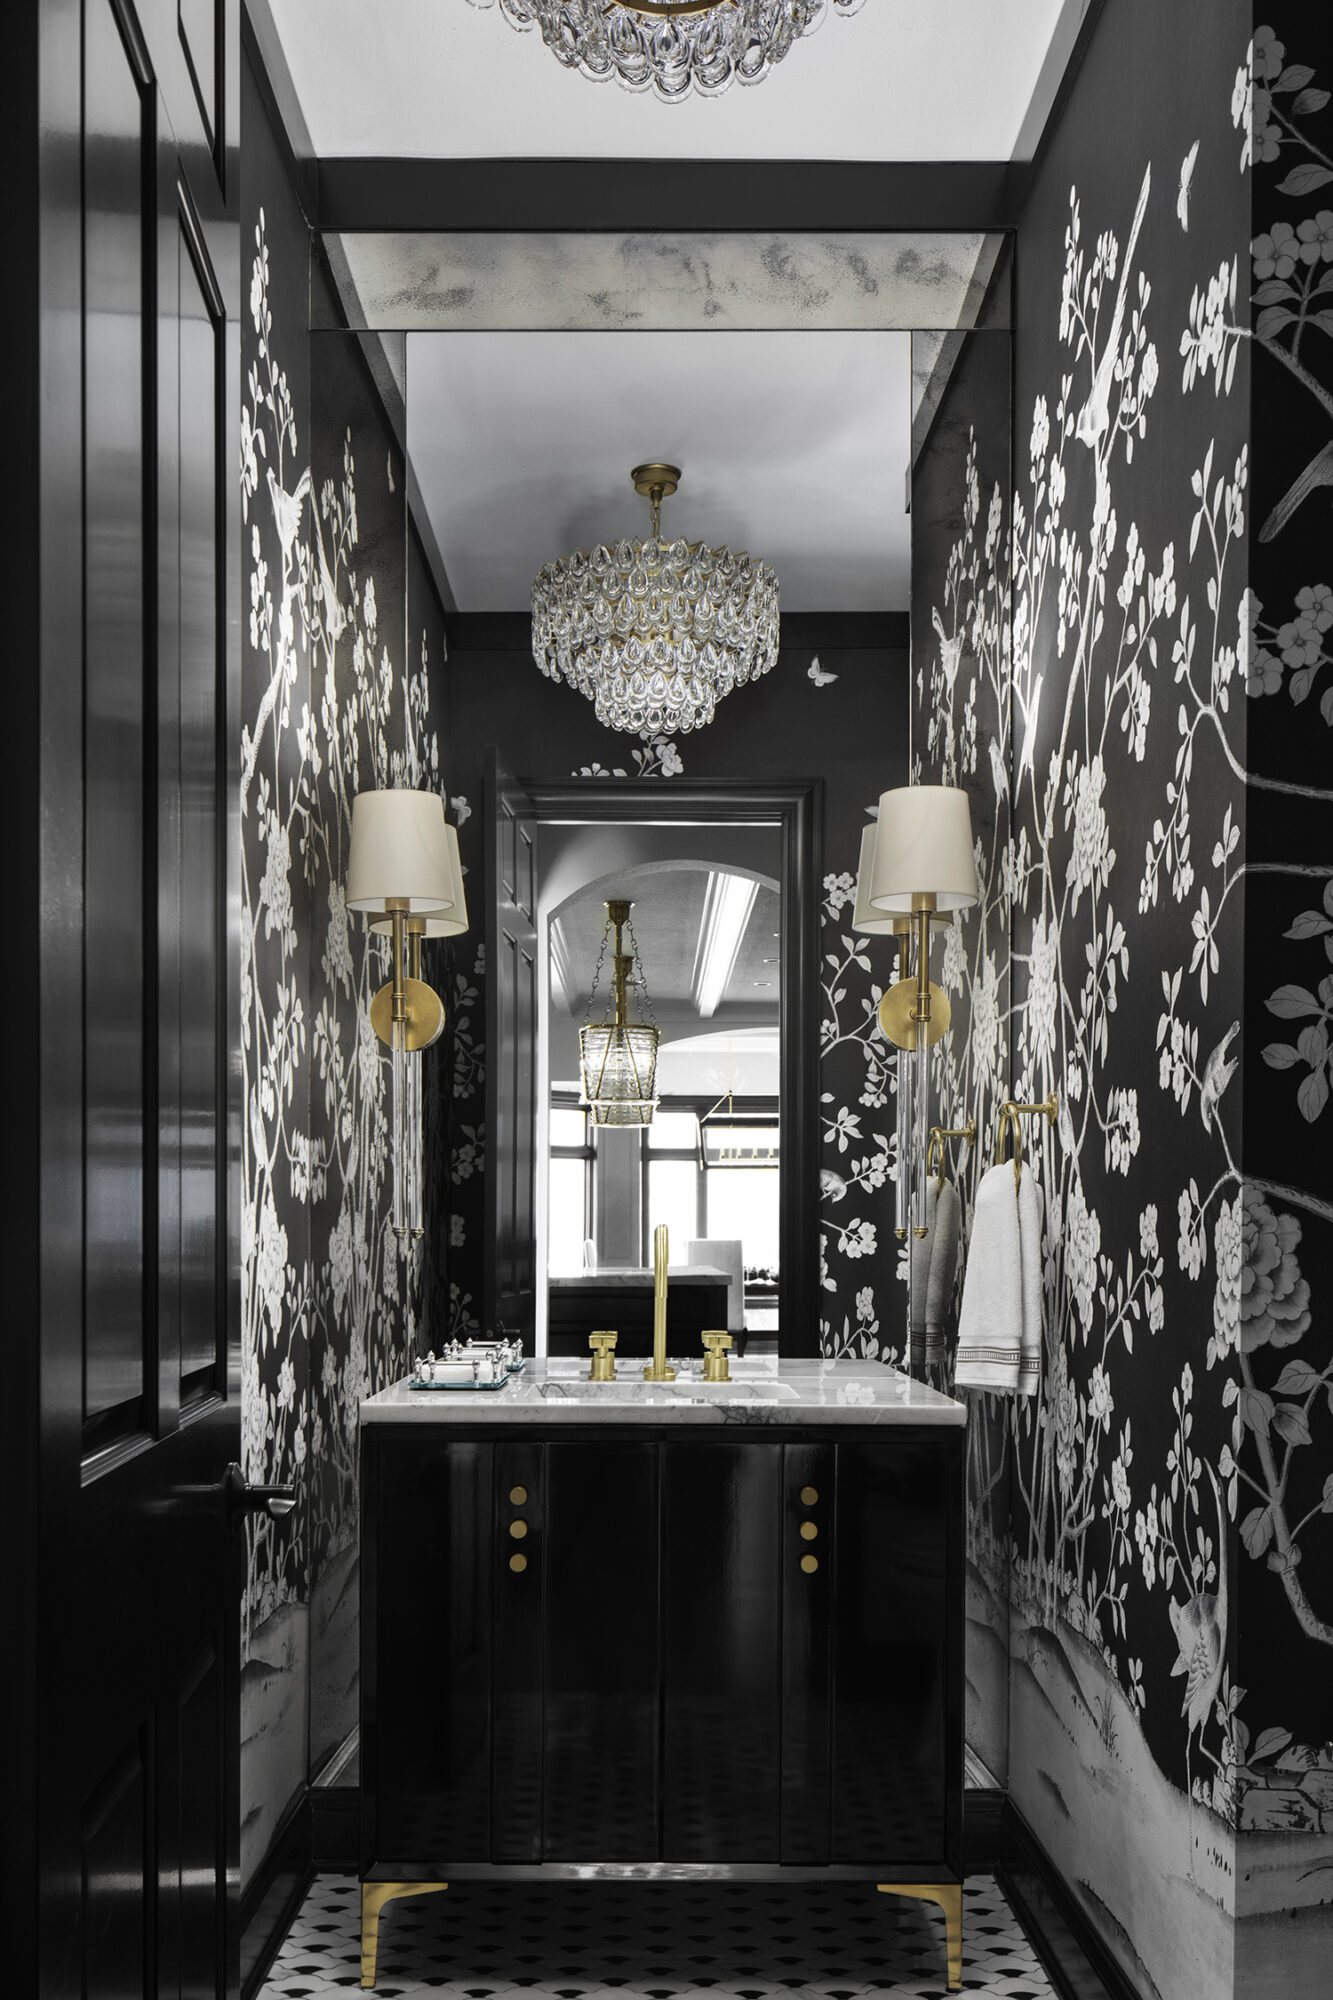 Today's Maximalist Bathrooms Are Redefining 'More Is More'